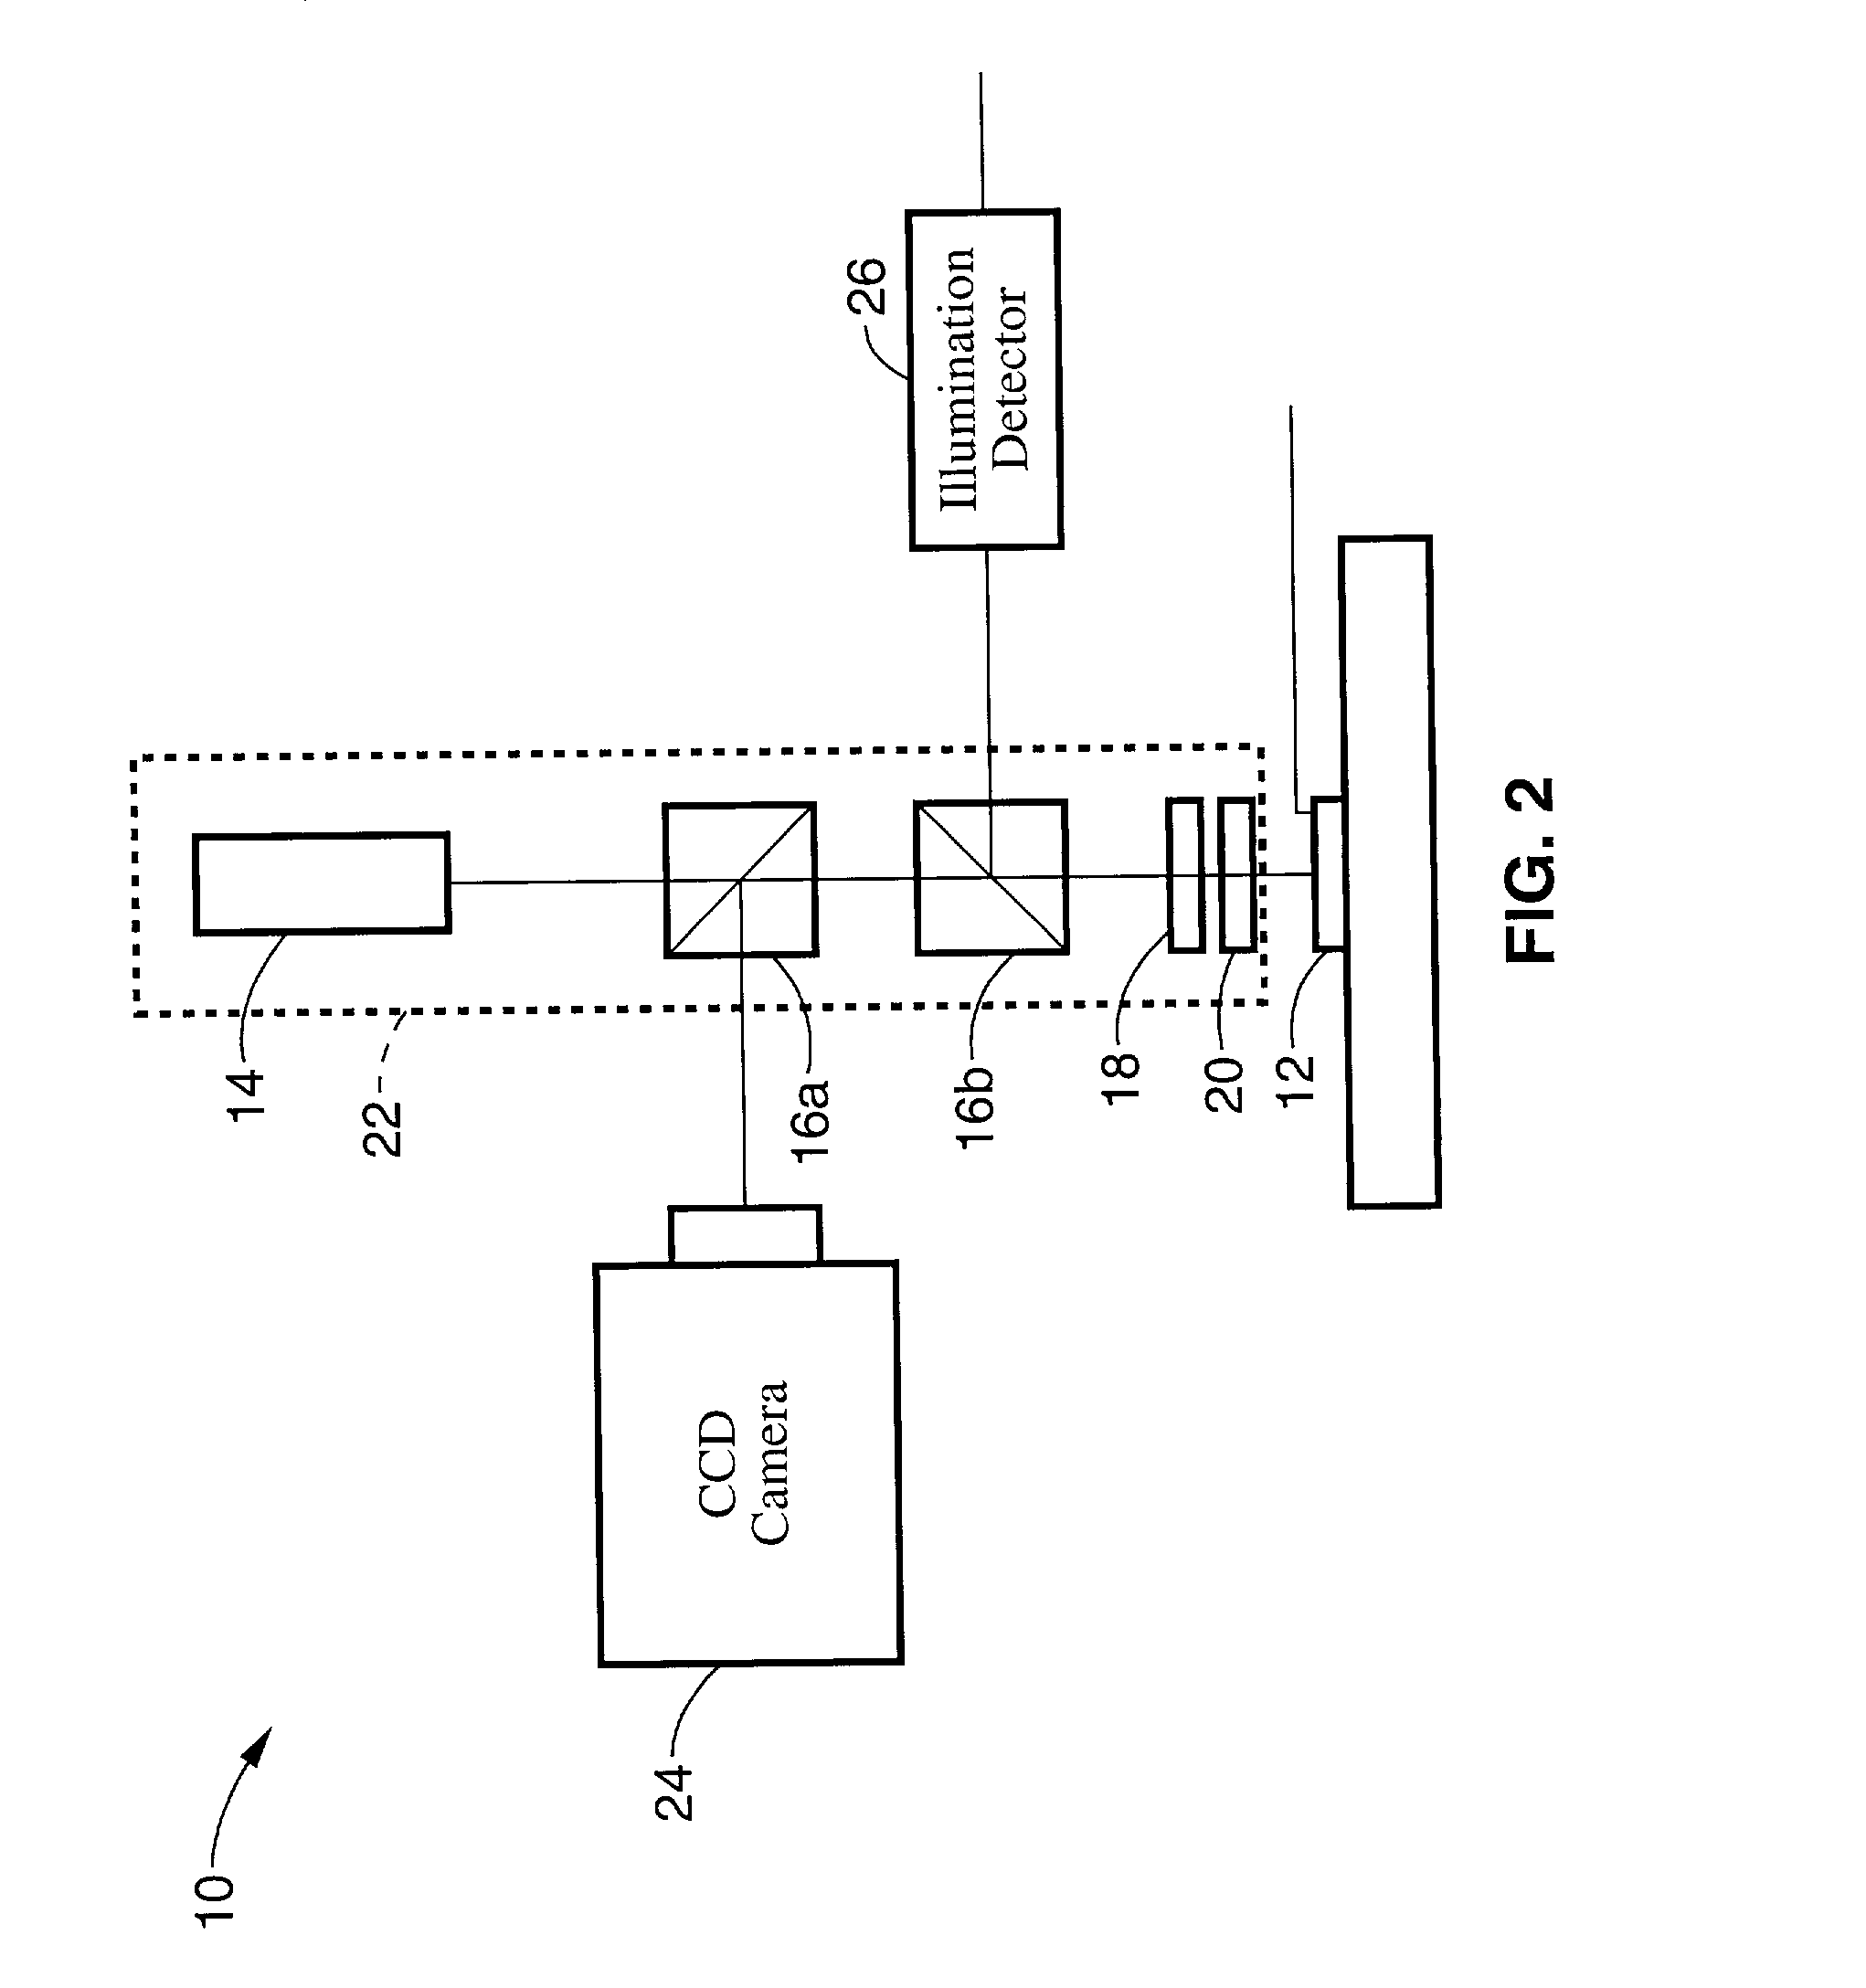 Submicron thermal imaging method and enhanced resolution (super-resolved) ac-coupled imaging for thermal inspection of integrated circuits